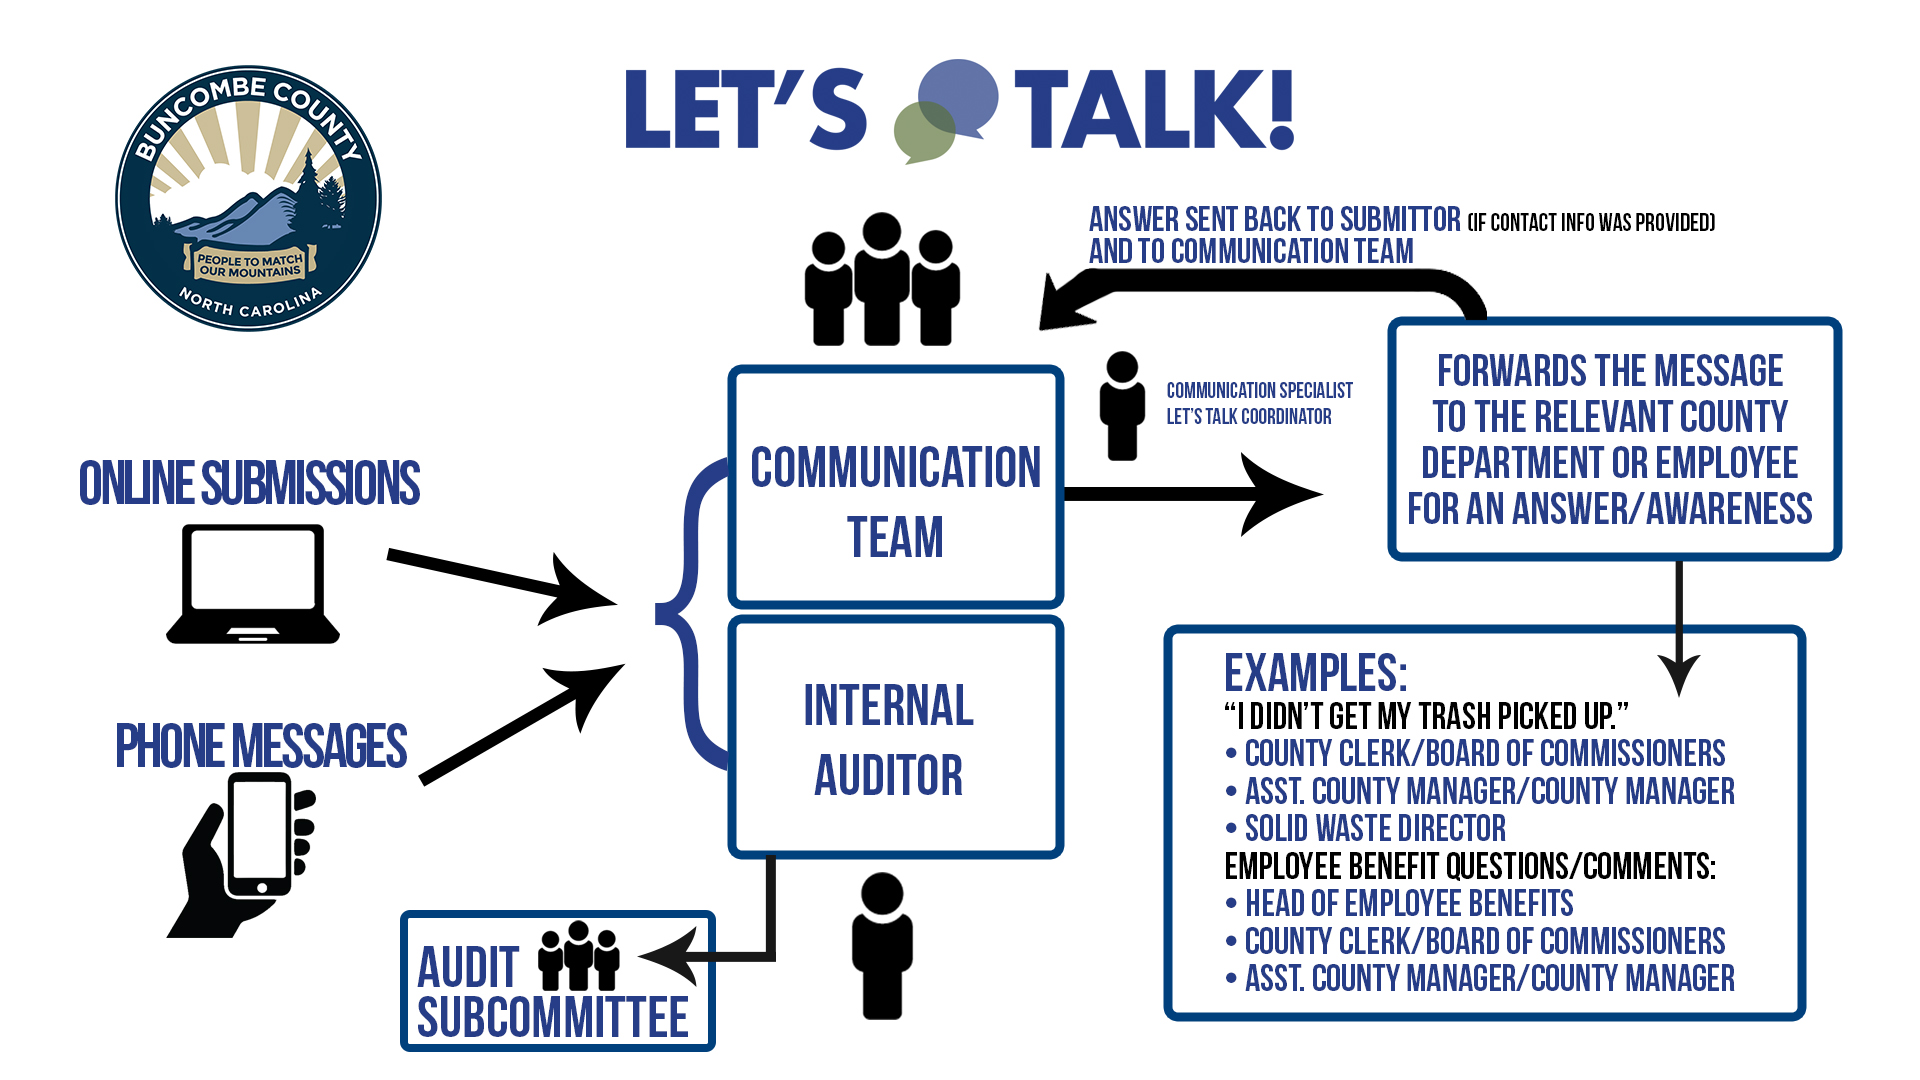 Let's Talk Flowchart: Comment cards, online submissions, and phone messages are submitted by the public and received by both our Communications Team and an Internal Auditor. Next, the Let's Talk Coordinator forwards the message to the relevant county department or employee for an answer or awareness. The response from the relevant department or employee gets sent back to the Communications Team, which then forwards the information to the original Submittor (if contact information was provided). Here are two examples of the Let's Talk process: 1) comments for the County Manager will go to the County Clerk and Board of Commissioners and the County Manager; and 2) health benefit questions or comments go to the Human Resources Director, the County Clerk and board of Commissioners, and the County Manager.